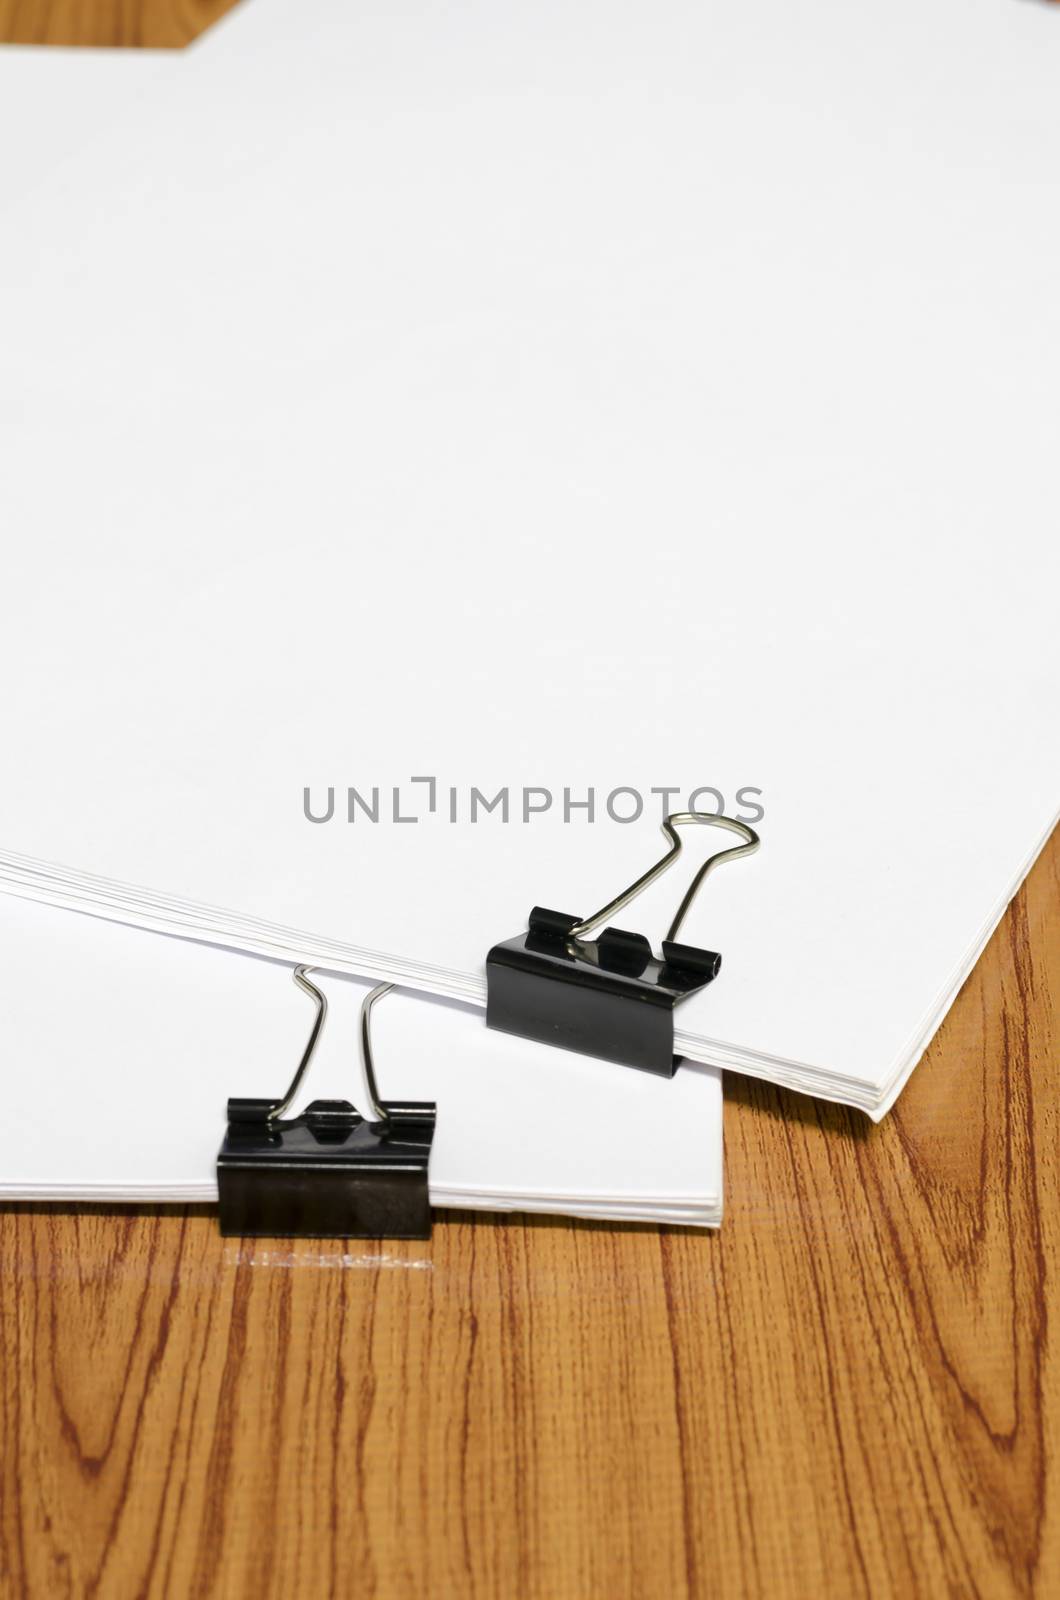 clip and paper on wood background